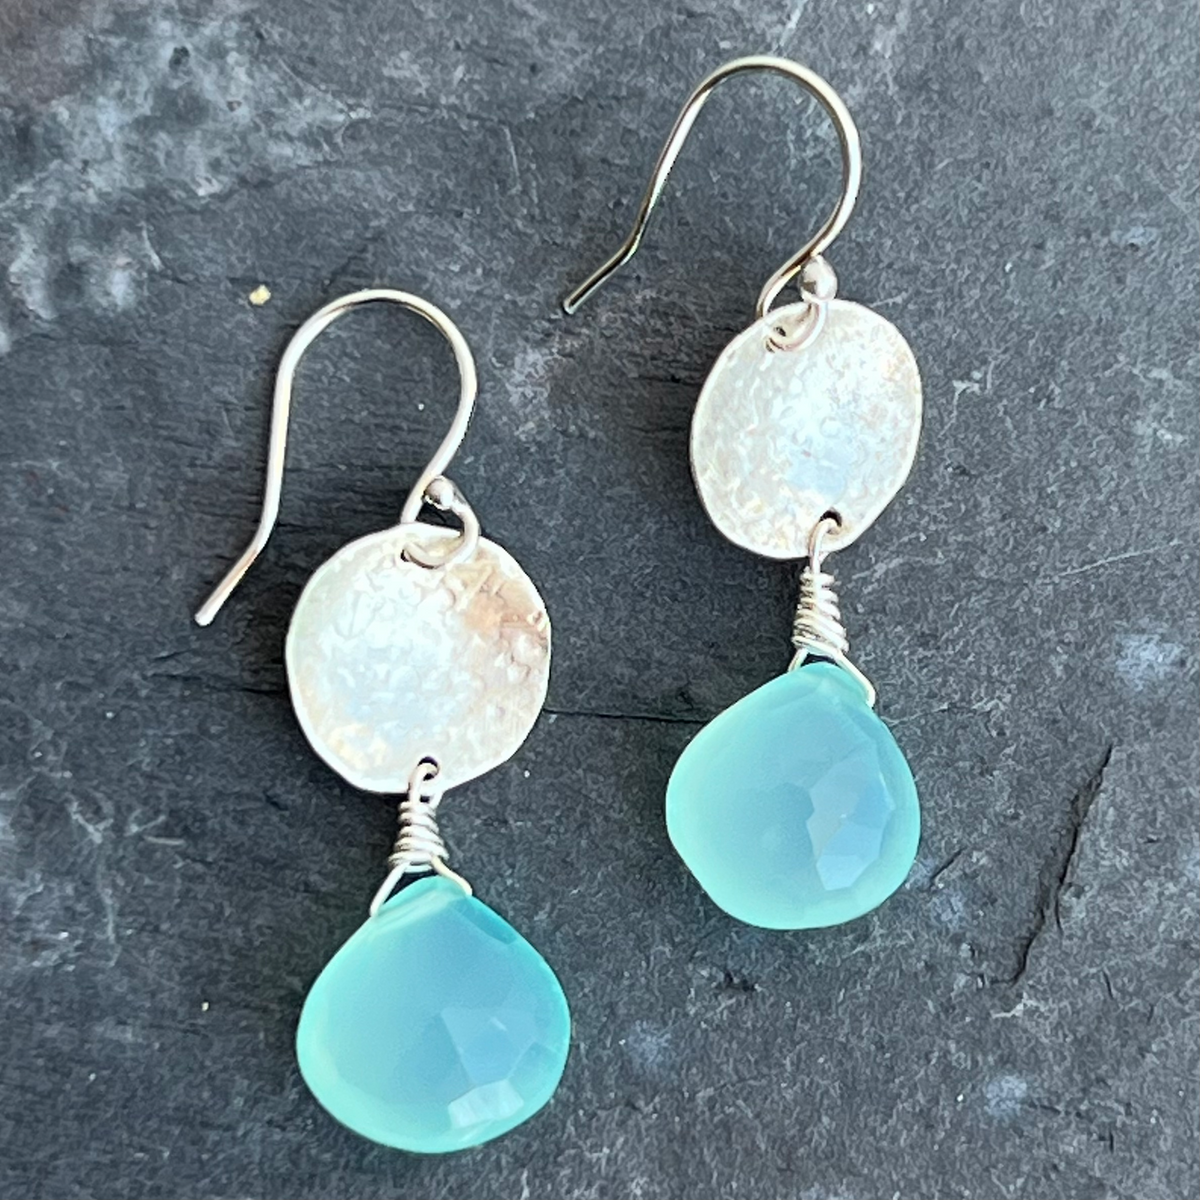 Chalcedony Sterling Moondrops Earrings at Garden of Silver.